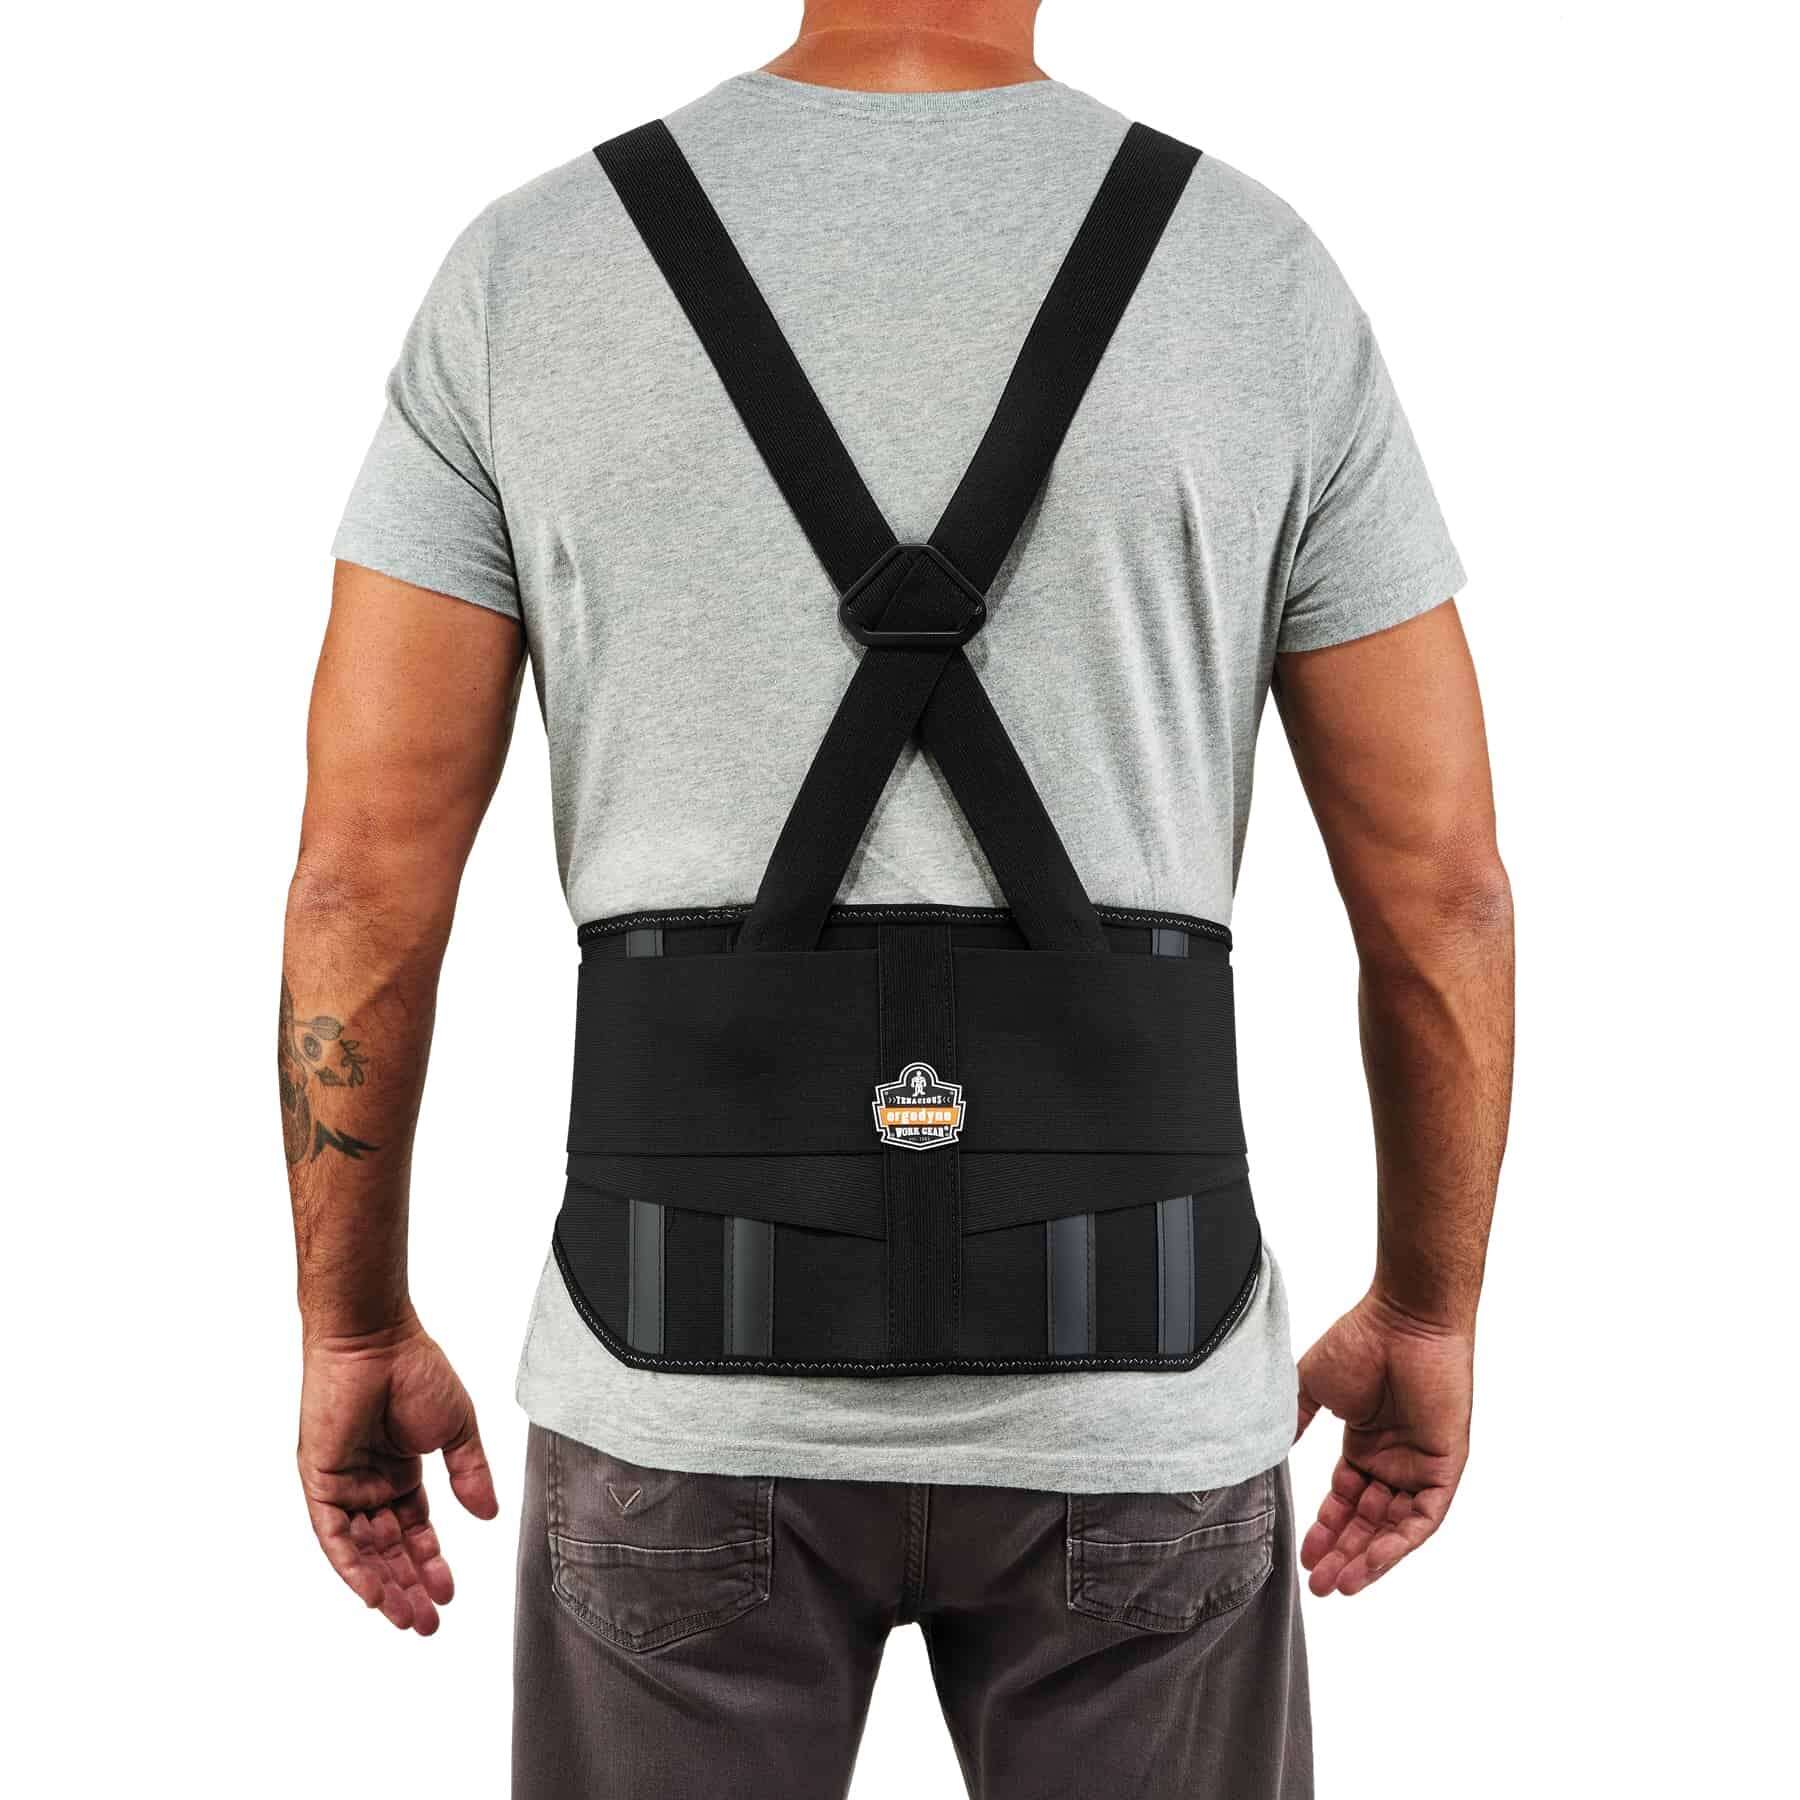 Plus Size Back Brace  Bariatric Big & Tall Support for Obese Person